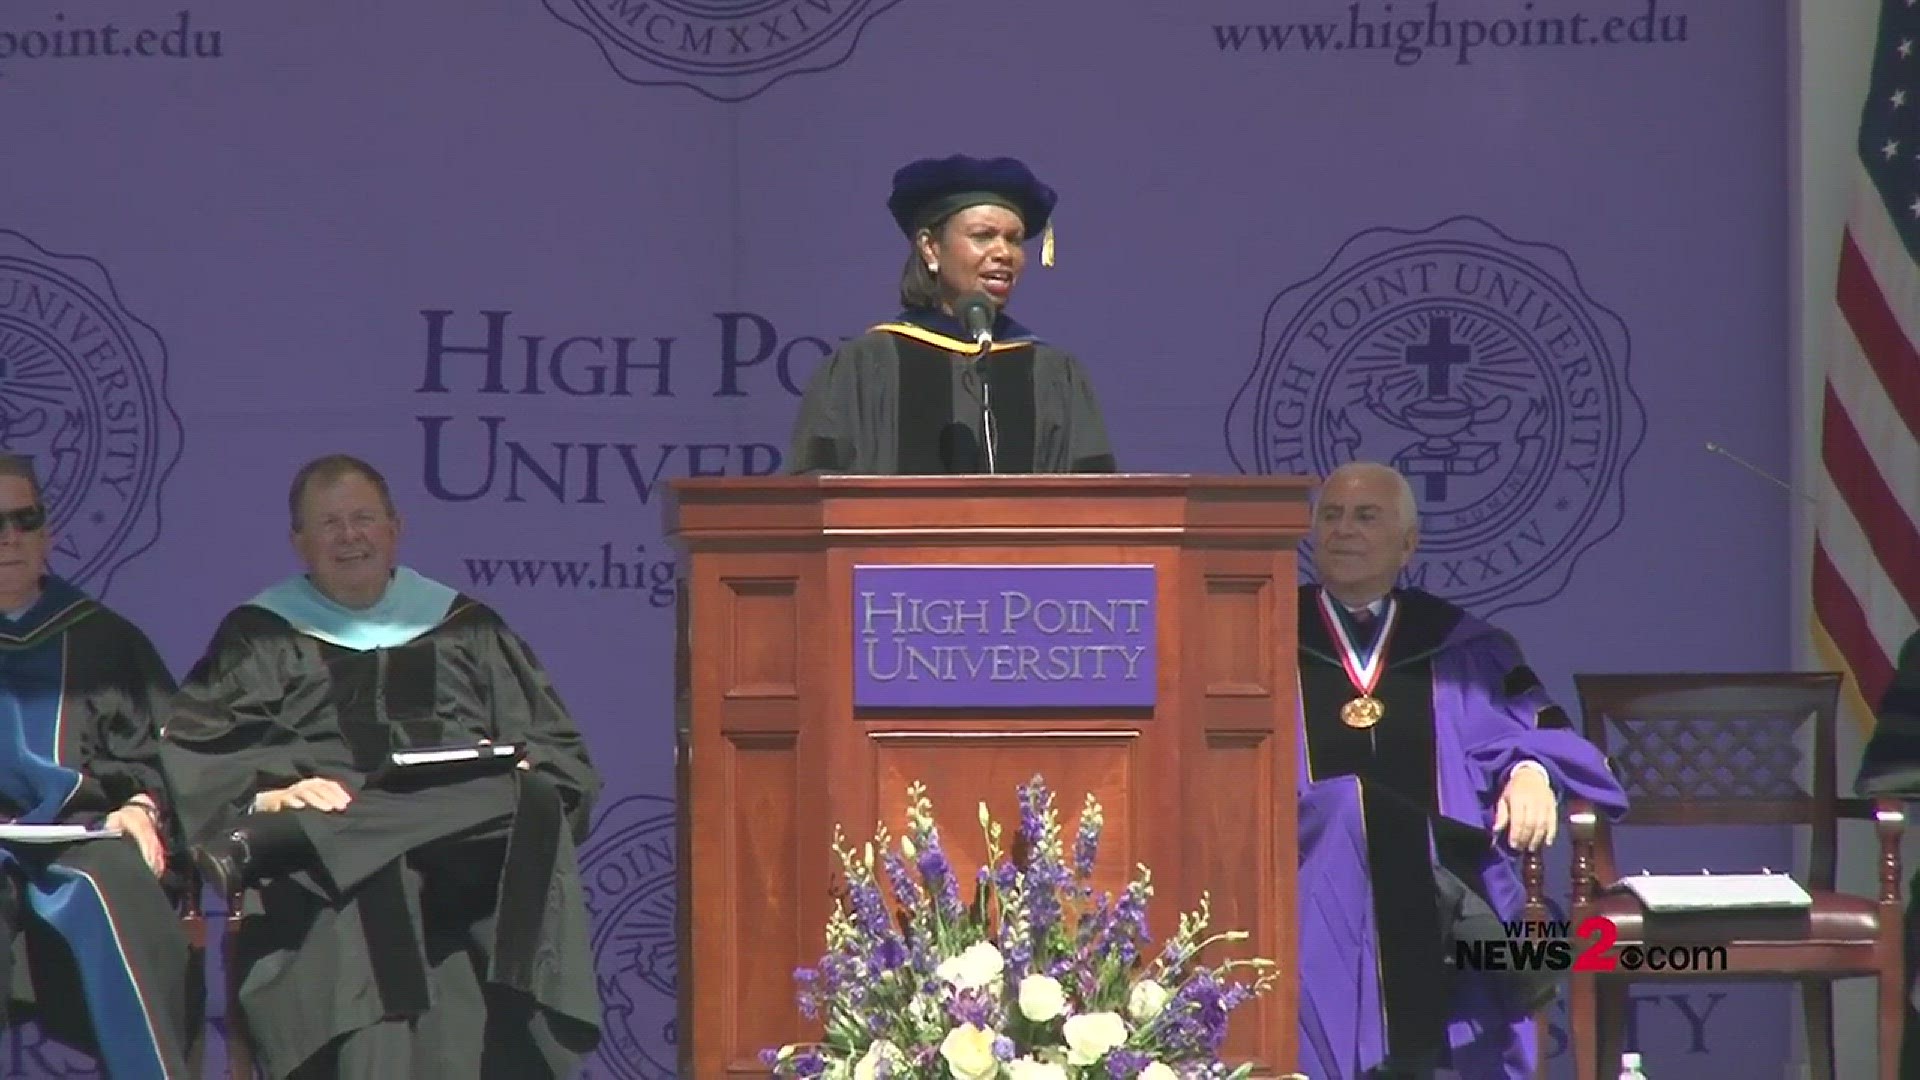 Rice challenged High Point University's class of 2016 to become optimists for the world.